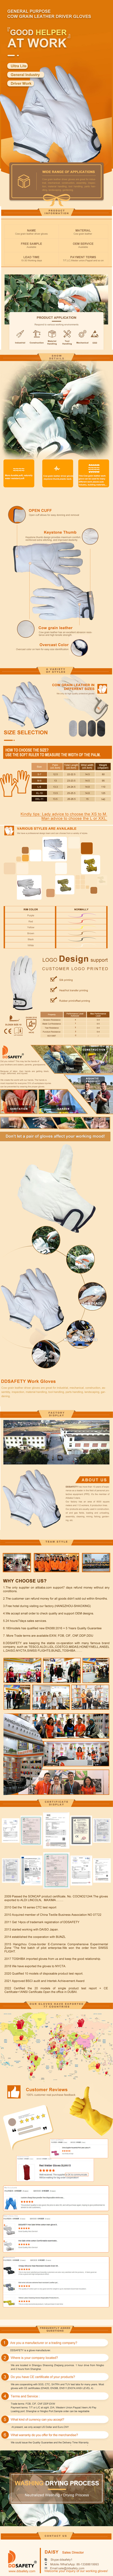 Durable Cow Grain Driver Leather Work Gloves Gardening Gloves for Women, Womens Work Gloves Small (beige+red) -  DLD529 Durable Cow Grain Driver Leather Work Gloves Gardening Gloves for Women, Womens Work Gloves Small (beige+red) -  DLD529 Cow Grain Driver gloves,river Leather Work Gloves,Gardening Gloves for Women